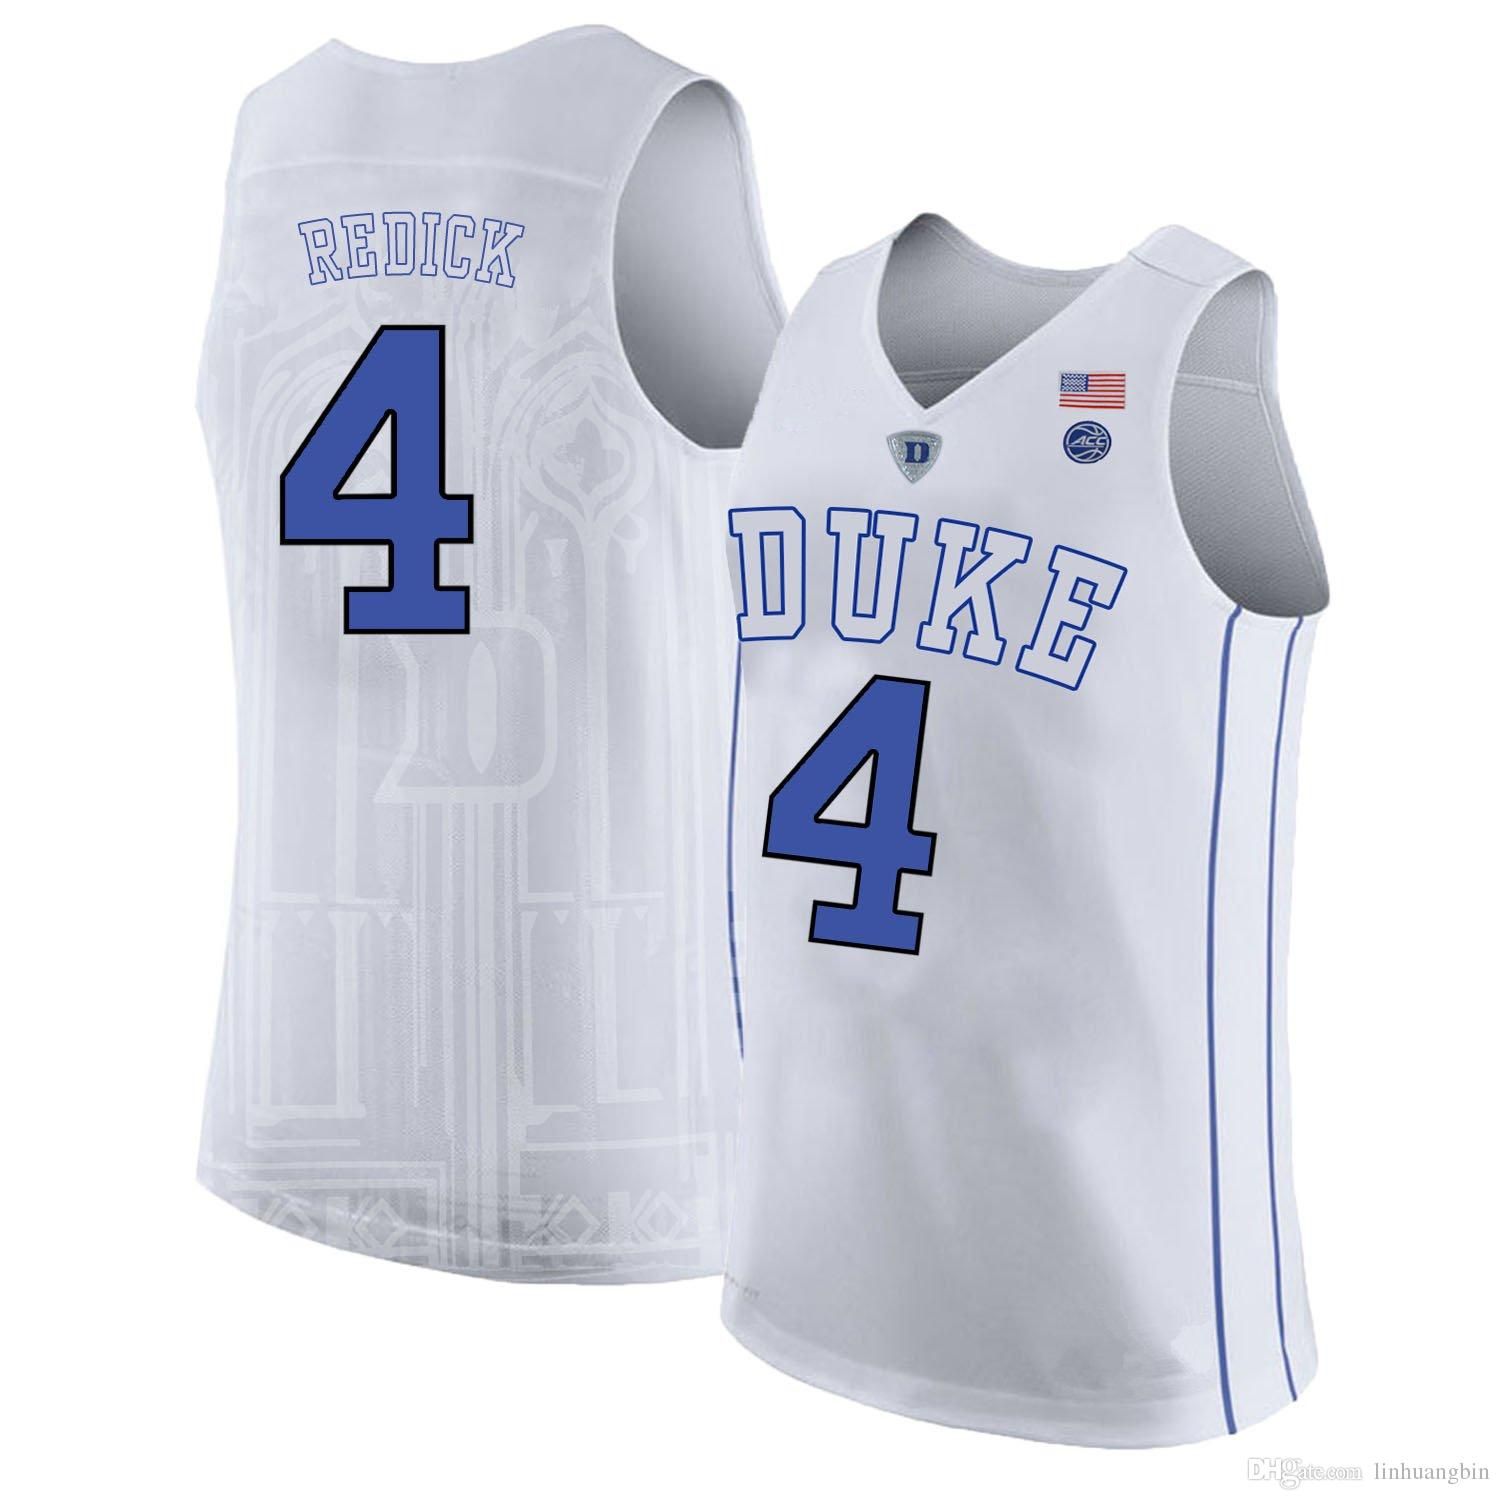 kyrie irving duke jersey youth